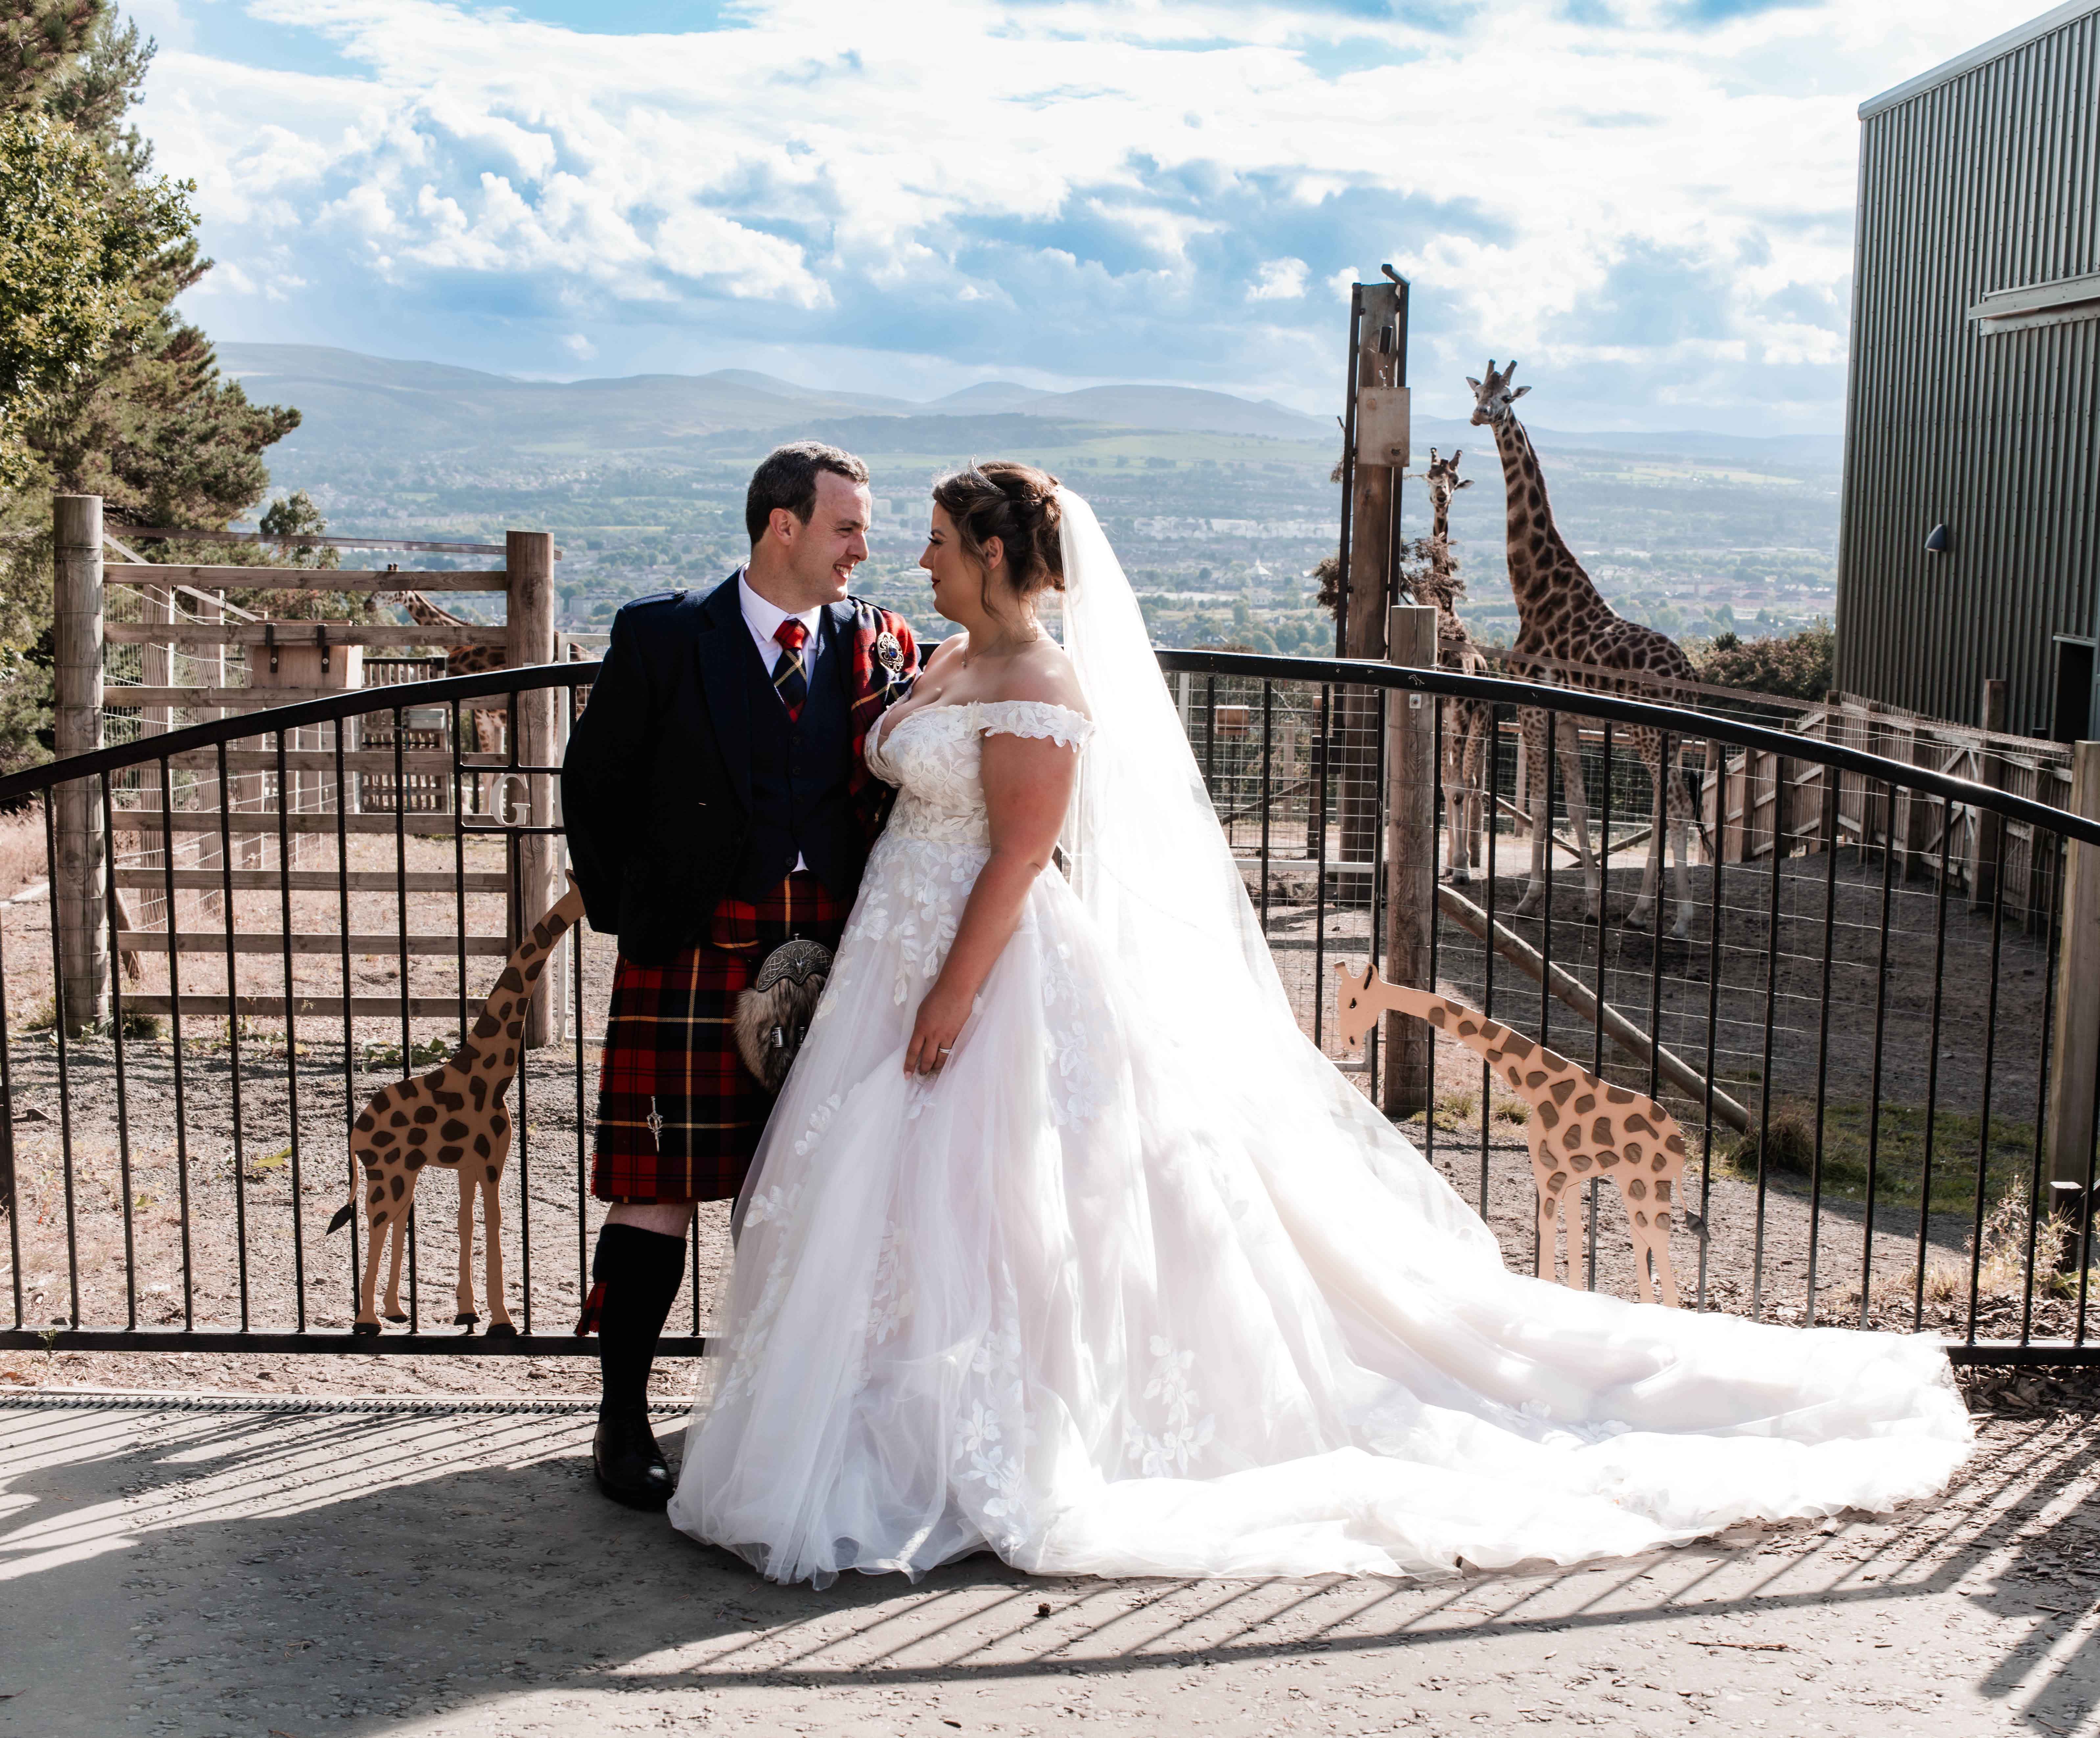 Bride and groom pose outside of giraffe gate at the side of giraffe enclosure IMAGE: Compass 2023